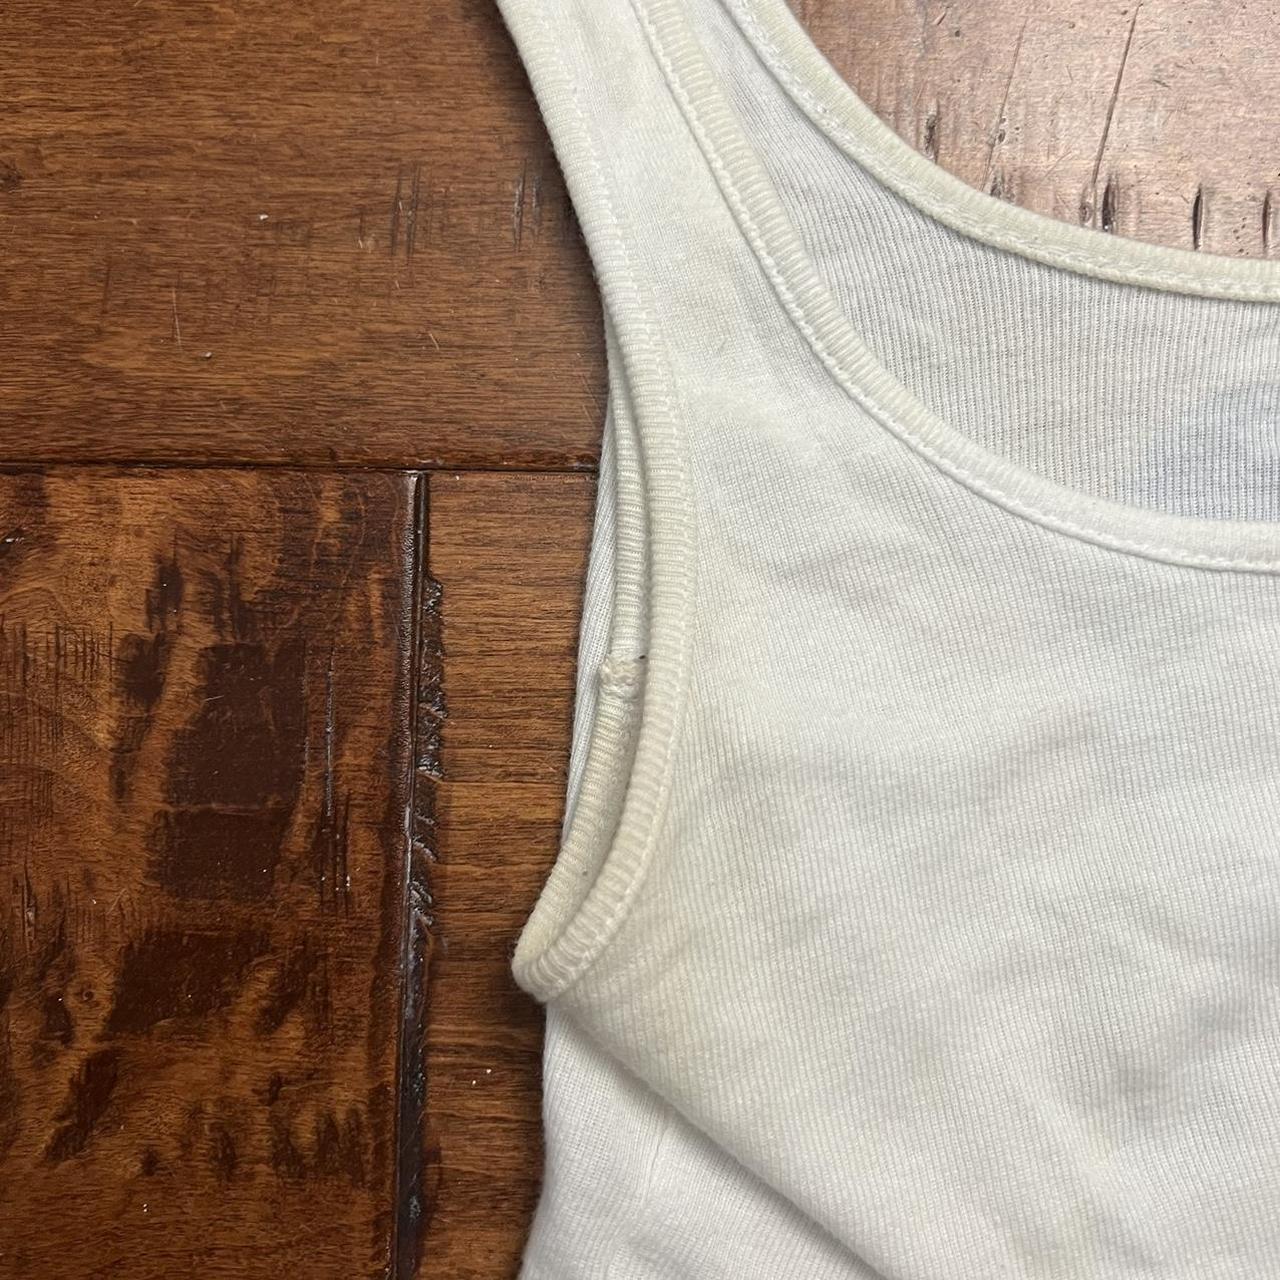 subdued angel cropped tank top. stains around pit - Depop